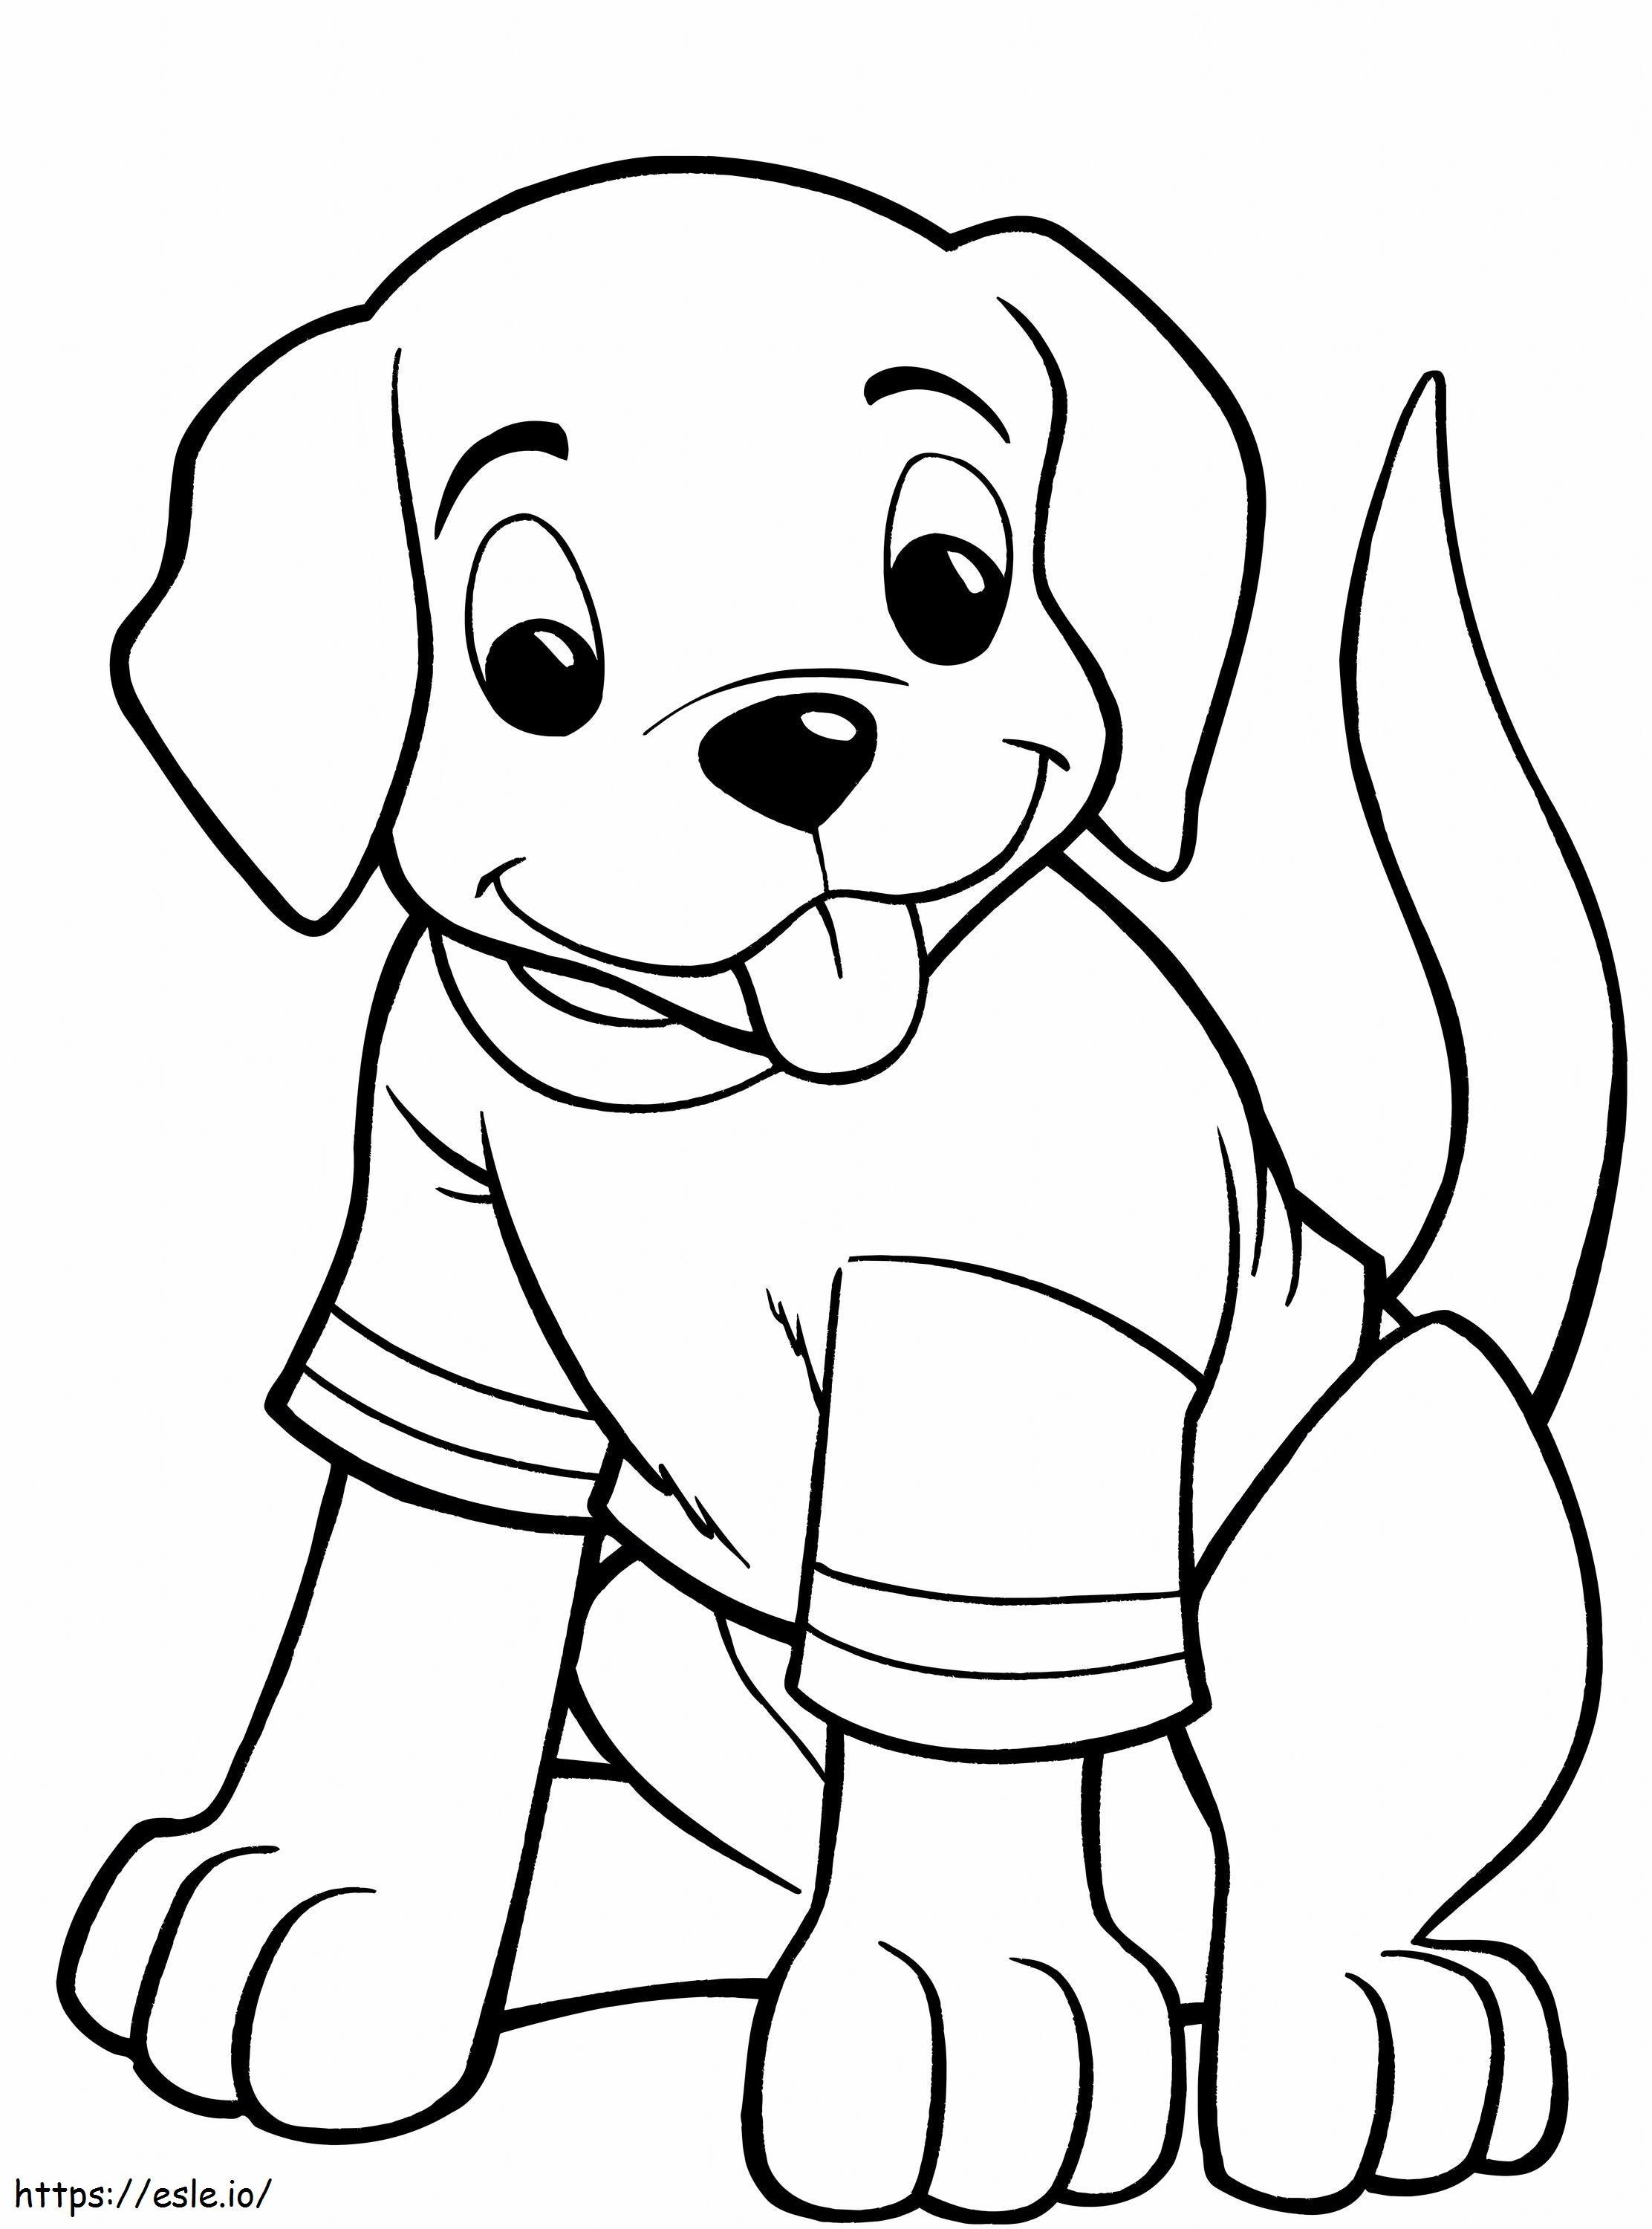 _Useful Cute Cartoon Puppy Unique Print Pictures To All Puppies Sheet Scaled para colorir